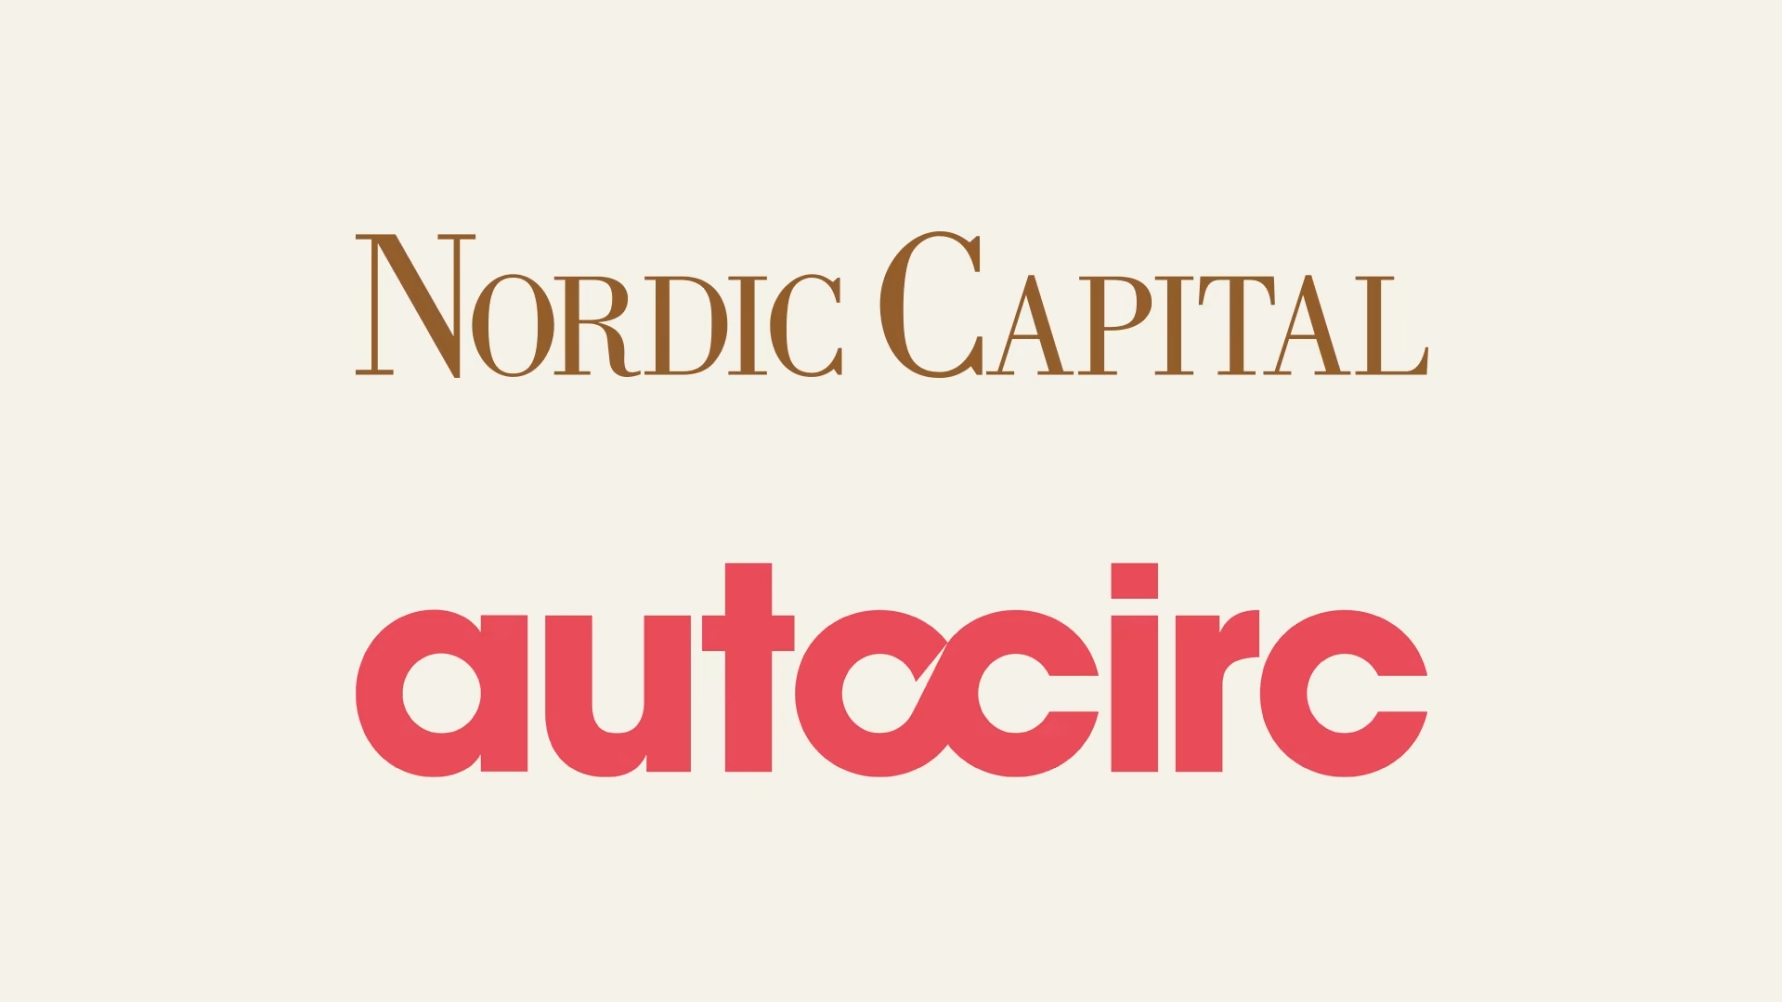 Autocirc Group receives approval from bondholders to make certain amendments to its bonds.